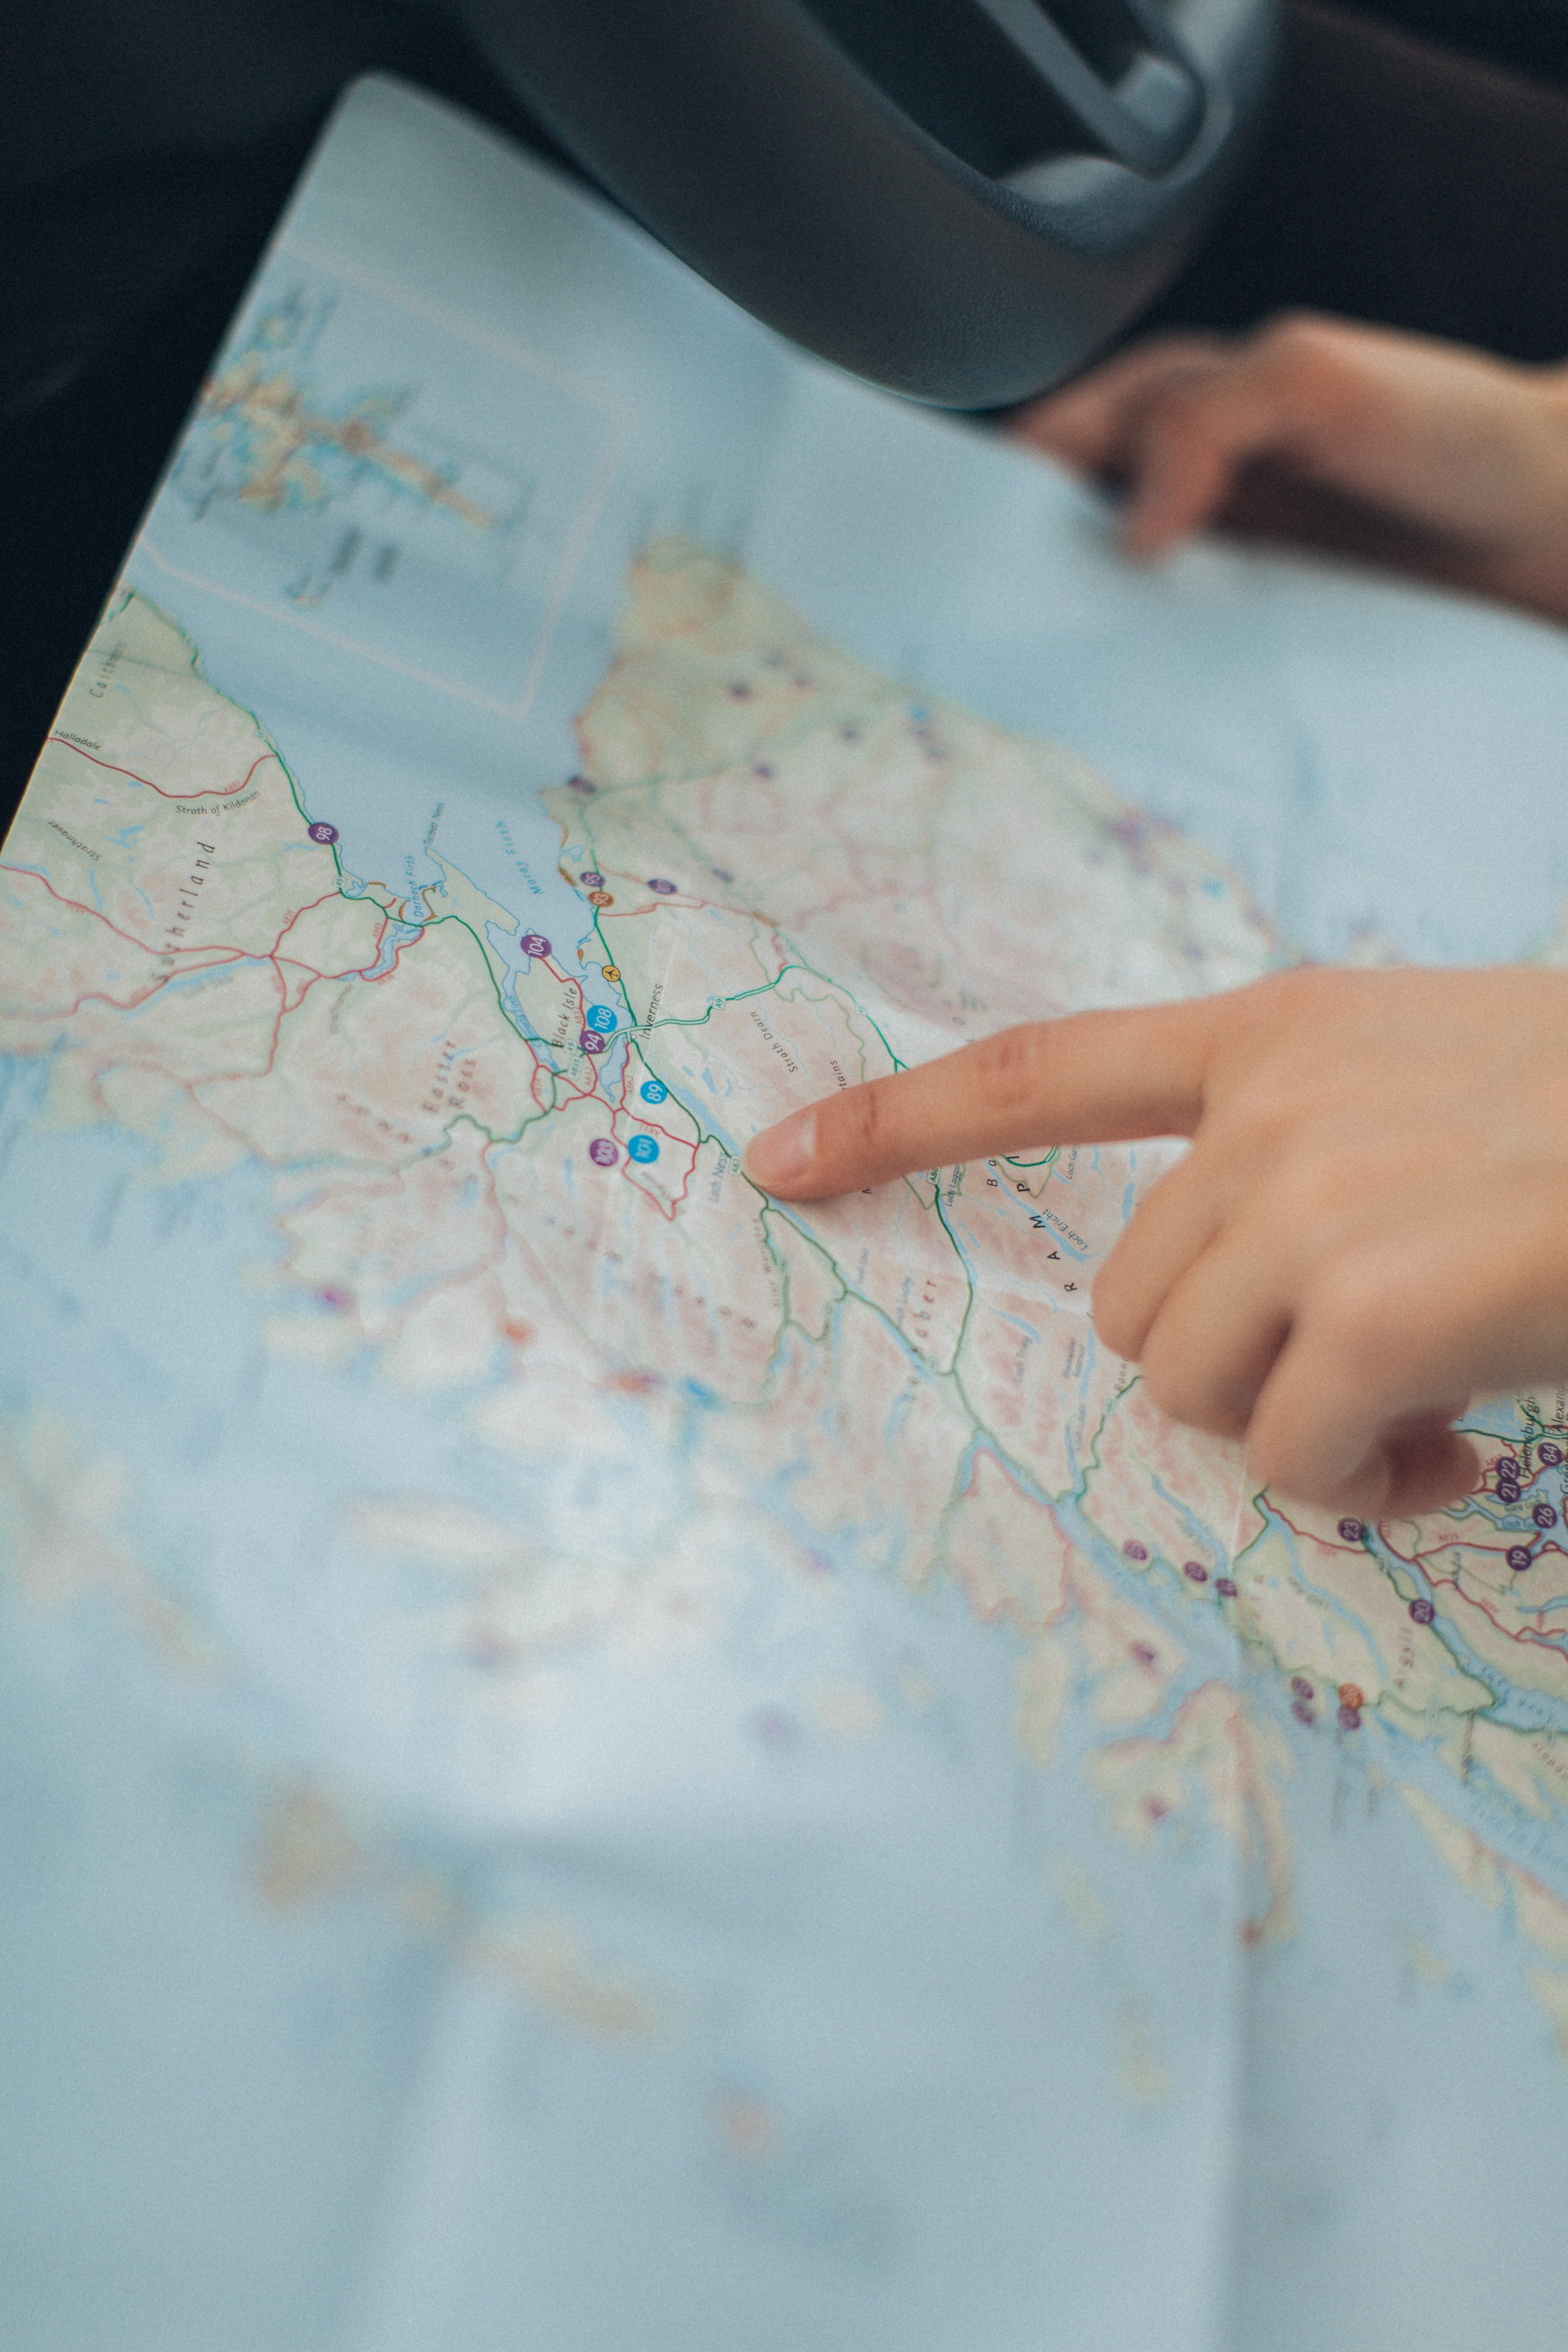 Abbie and Nicholas studied the city map to figure out the coordinates | Photo: Pexels